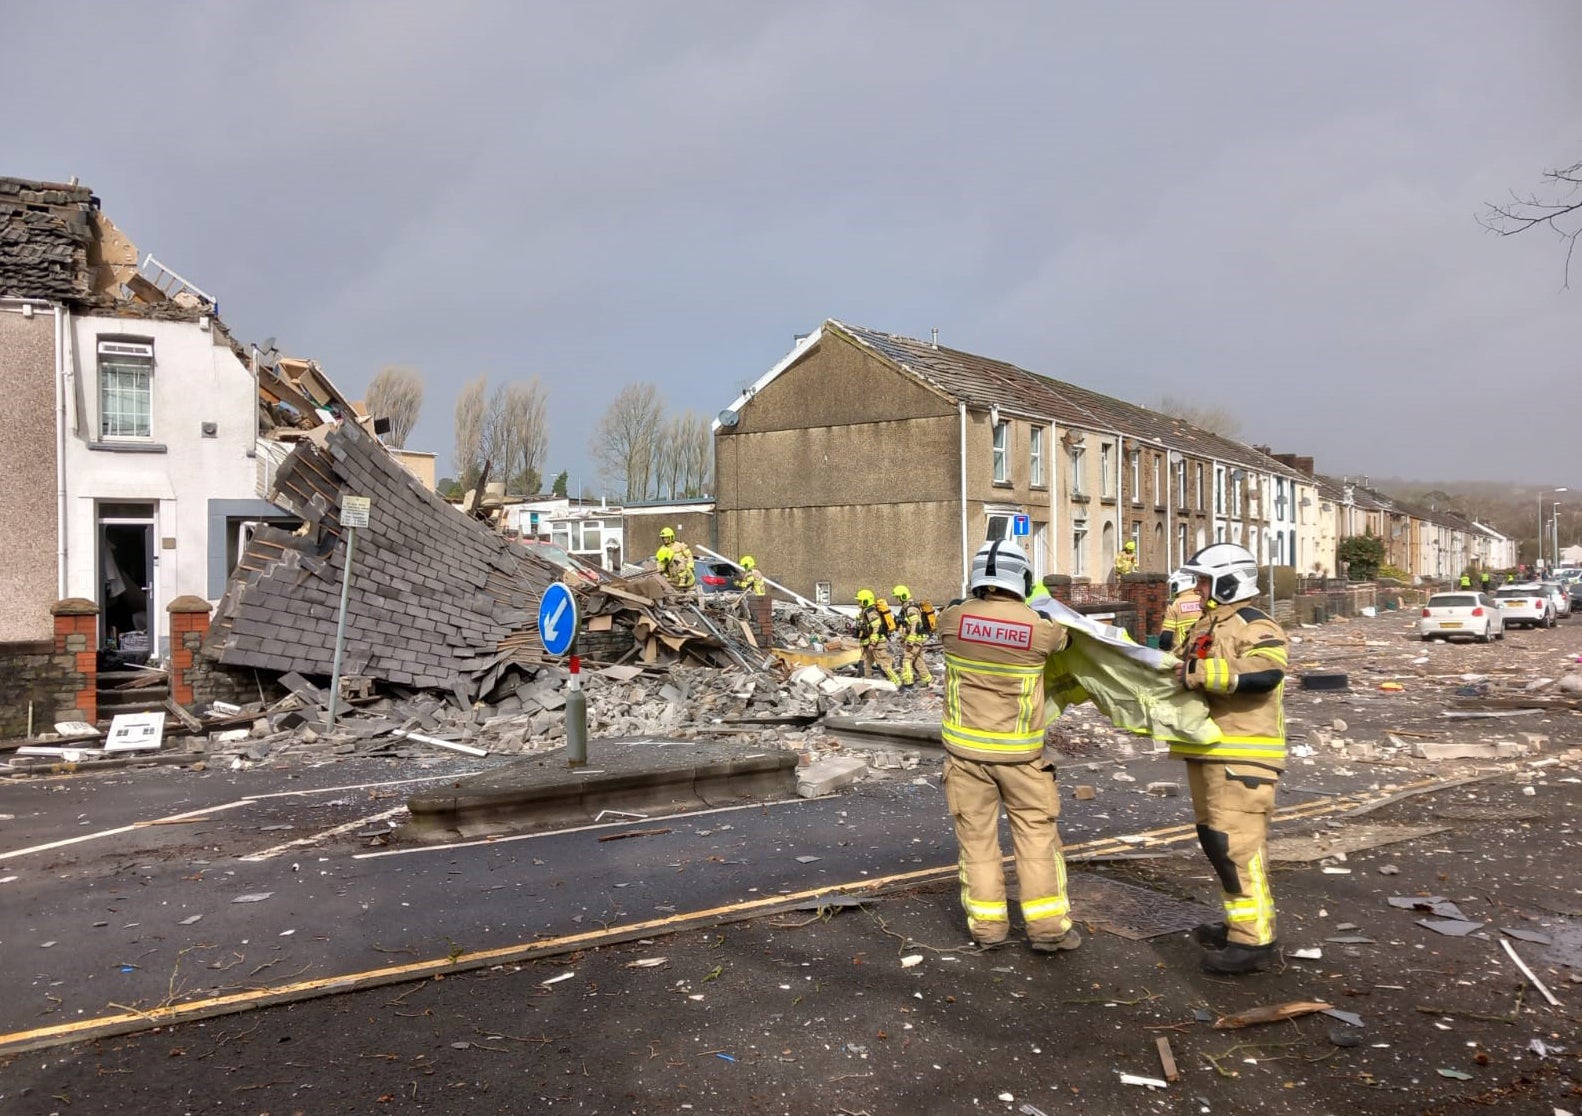 The cause of the blast is not yet known, Wales & West Utilities has said